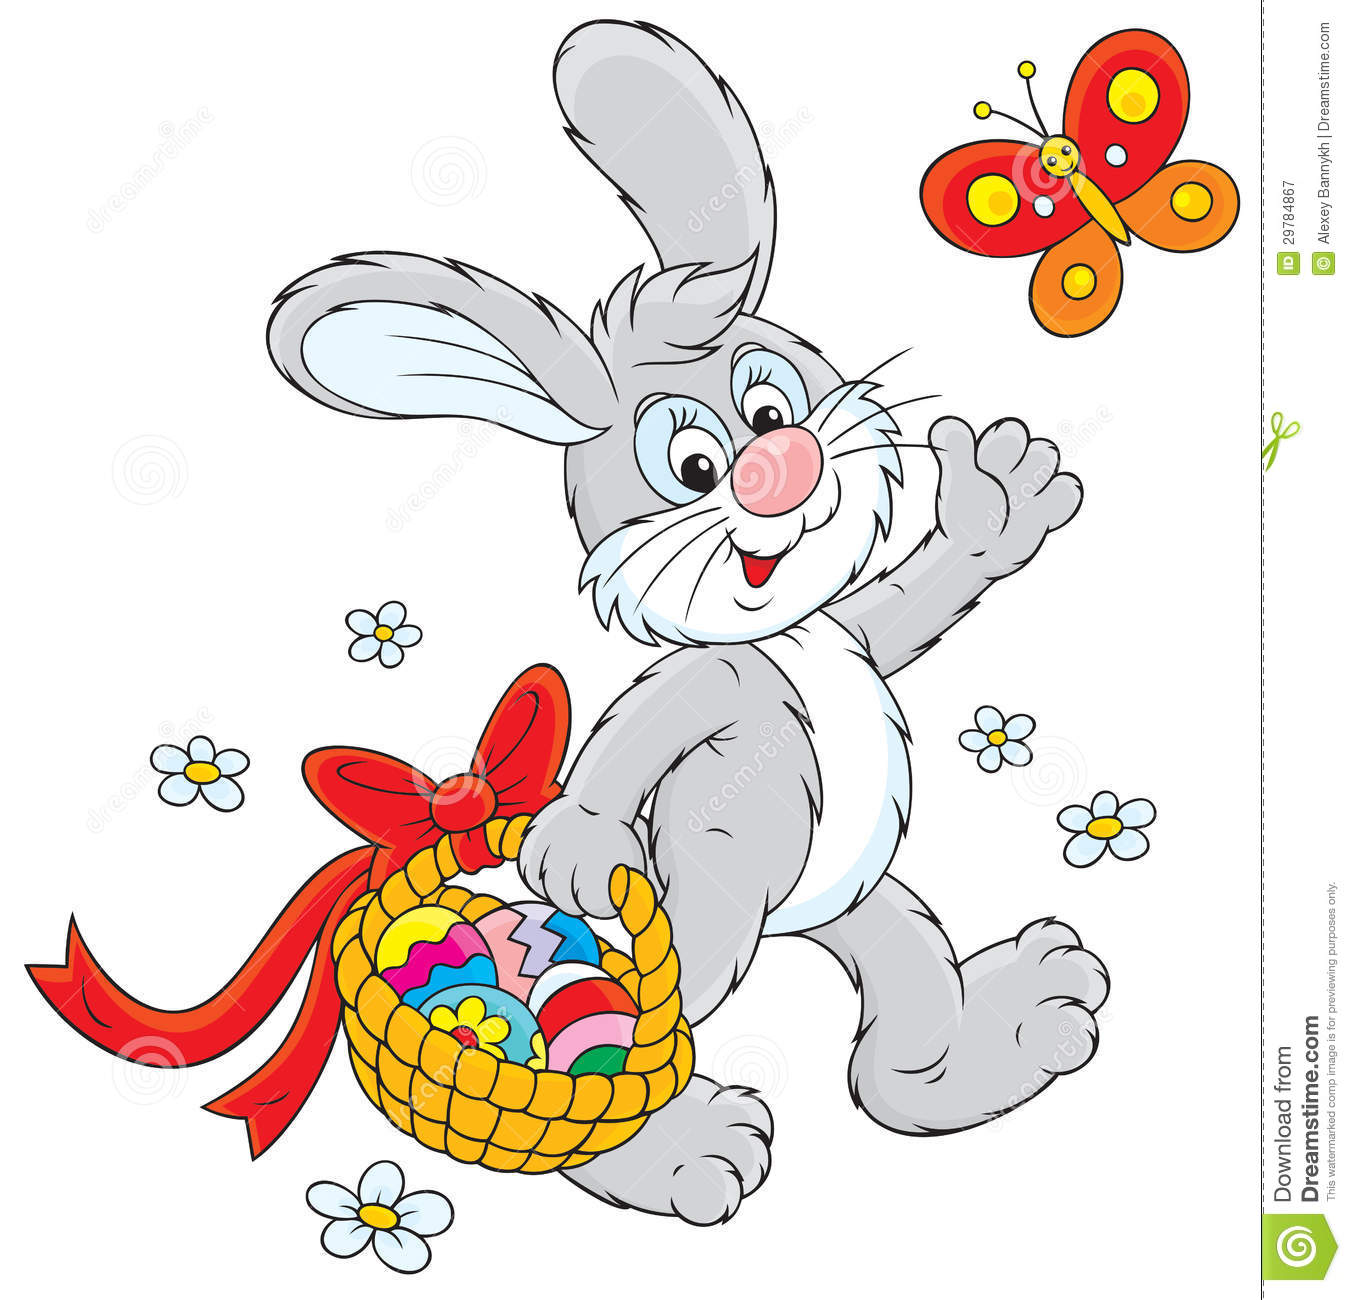 Easter Bunny With A Basket Of Eggs Royalty Free Stock Photography